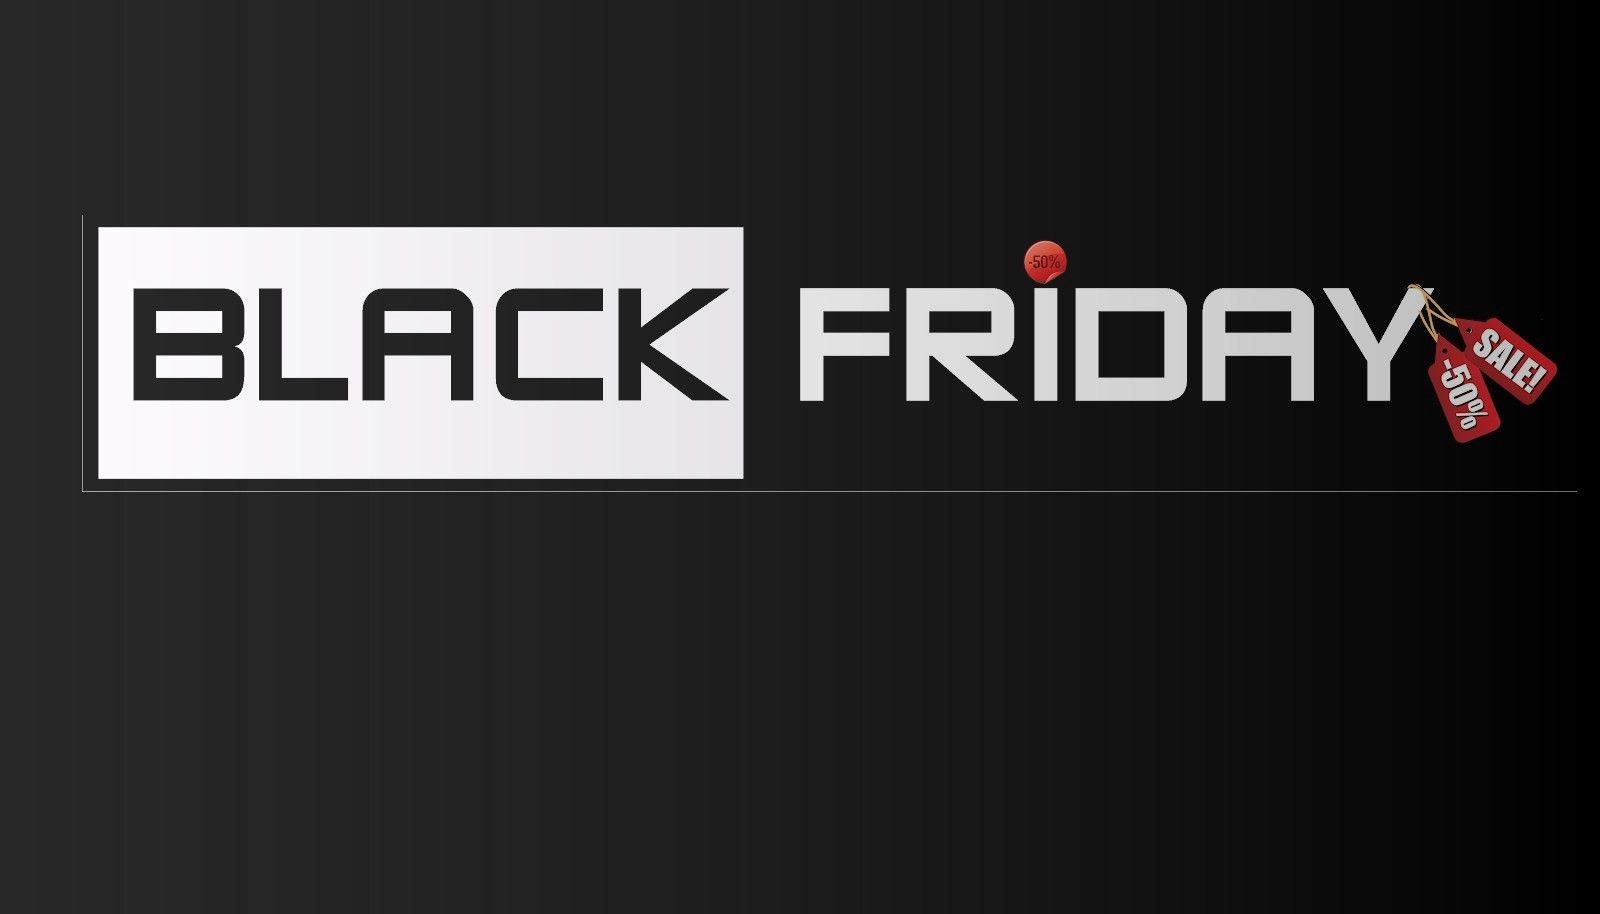 Black Friday 2016 Wallpaper Image. To5Animations.Com